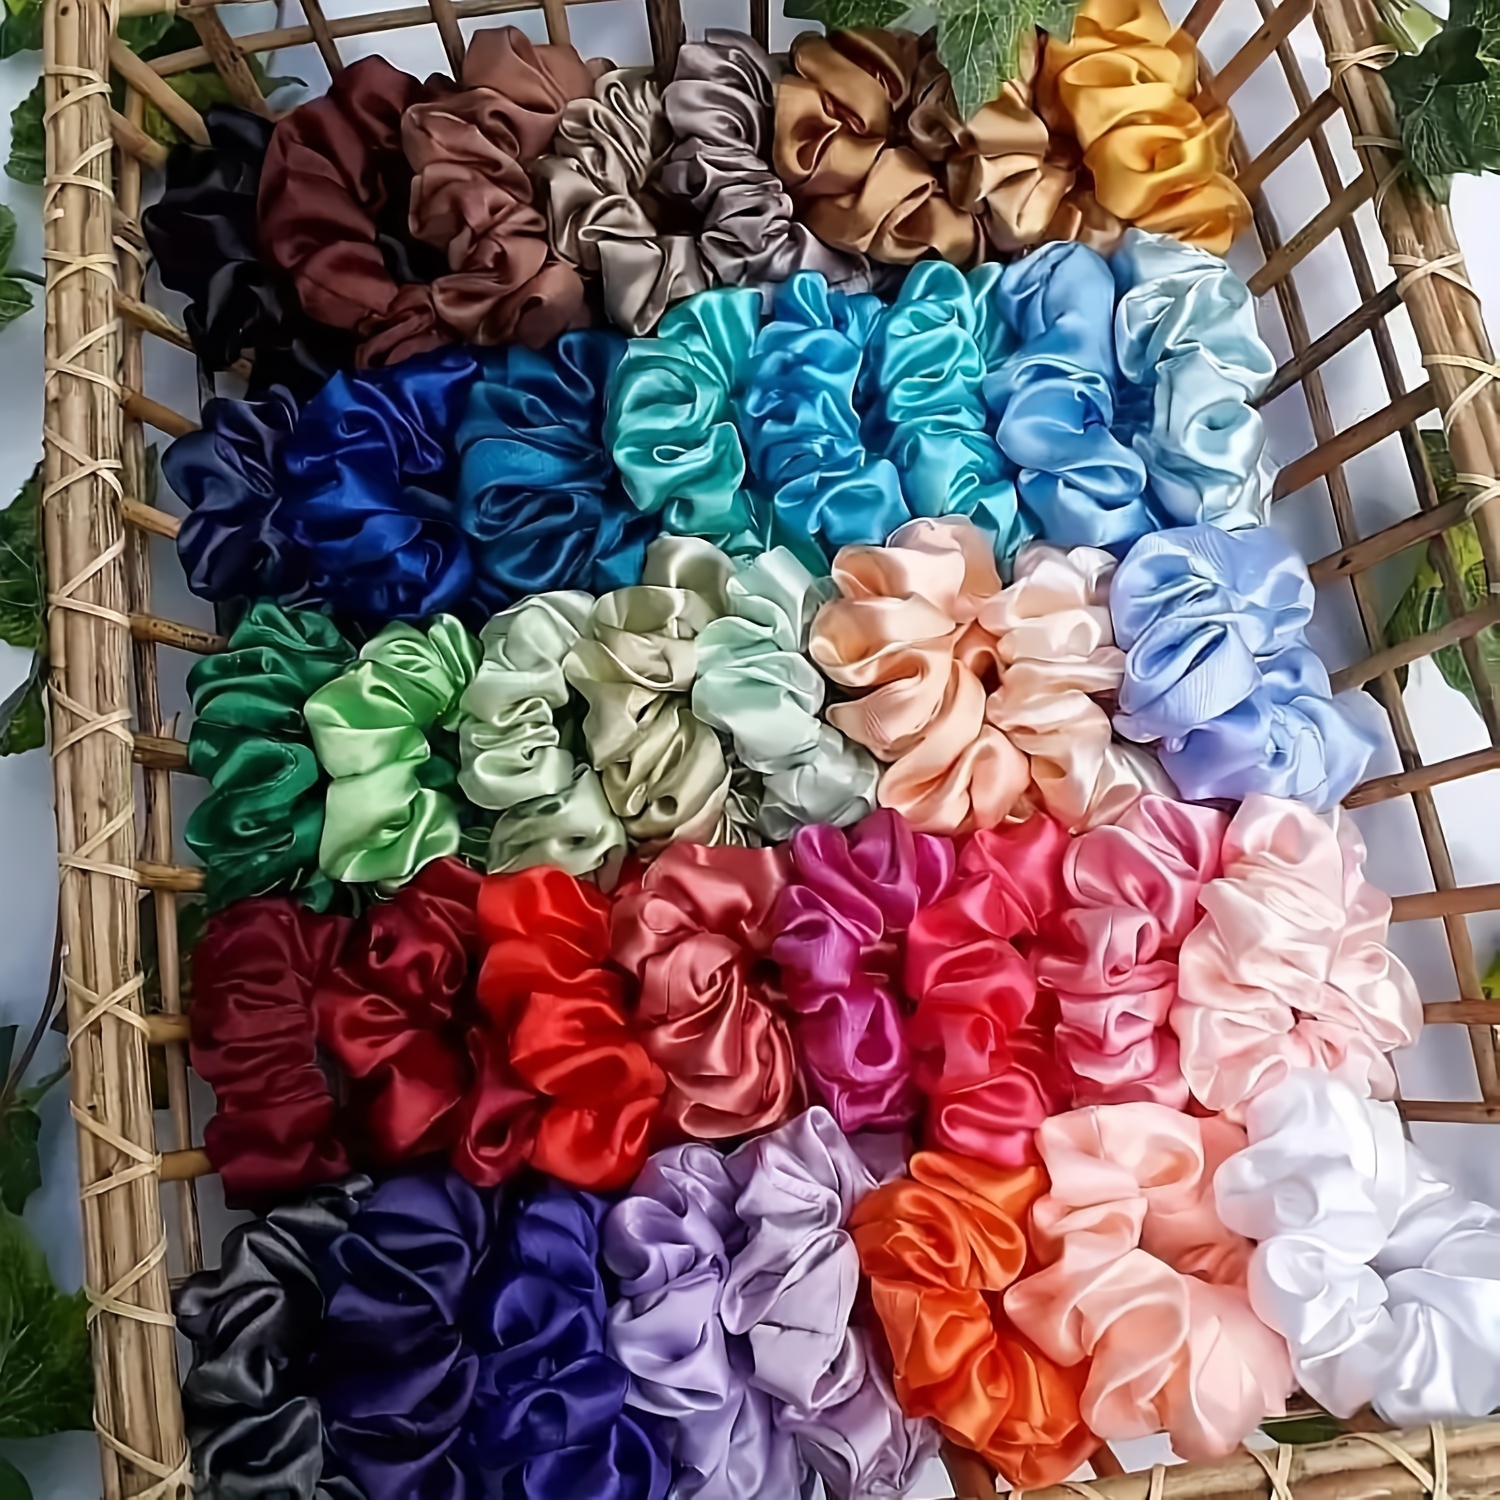 

40pcs Multicolor Hair Scrunchies, Satin Silky Hair Ties Ropes Ponytail Holders, Classic Elastic Hair Bands Hair Accessories (40 Colors)